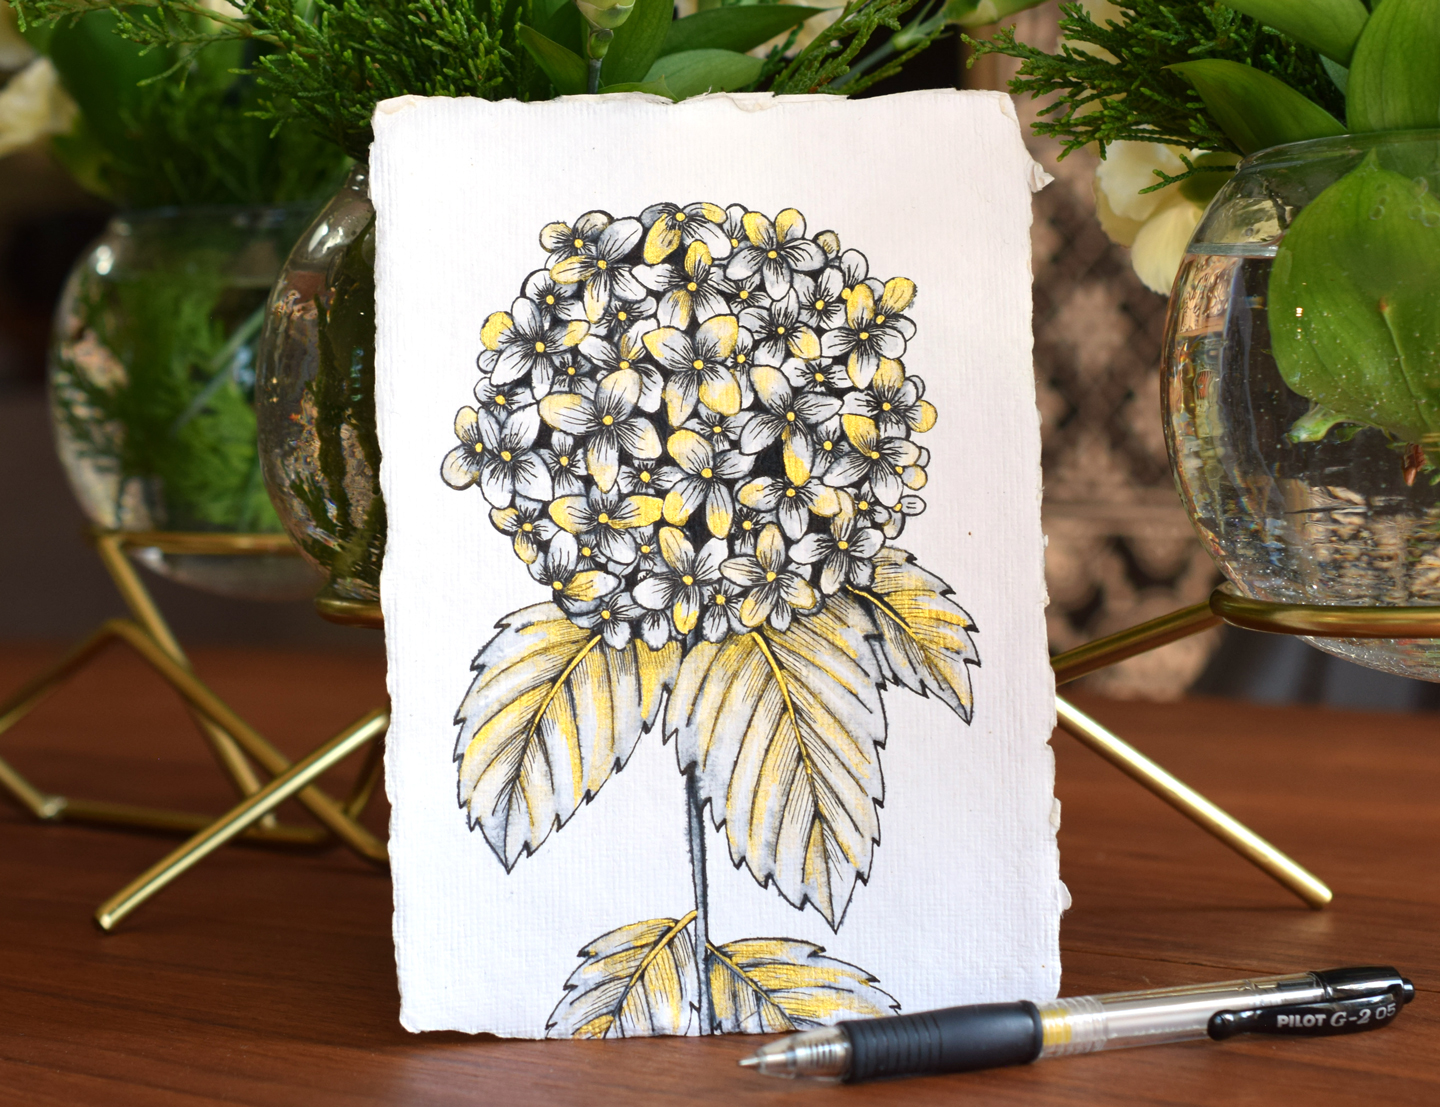 Gorgeous “Water Stained” Hydrangea Illustration Tutorial